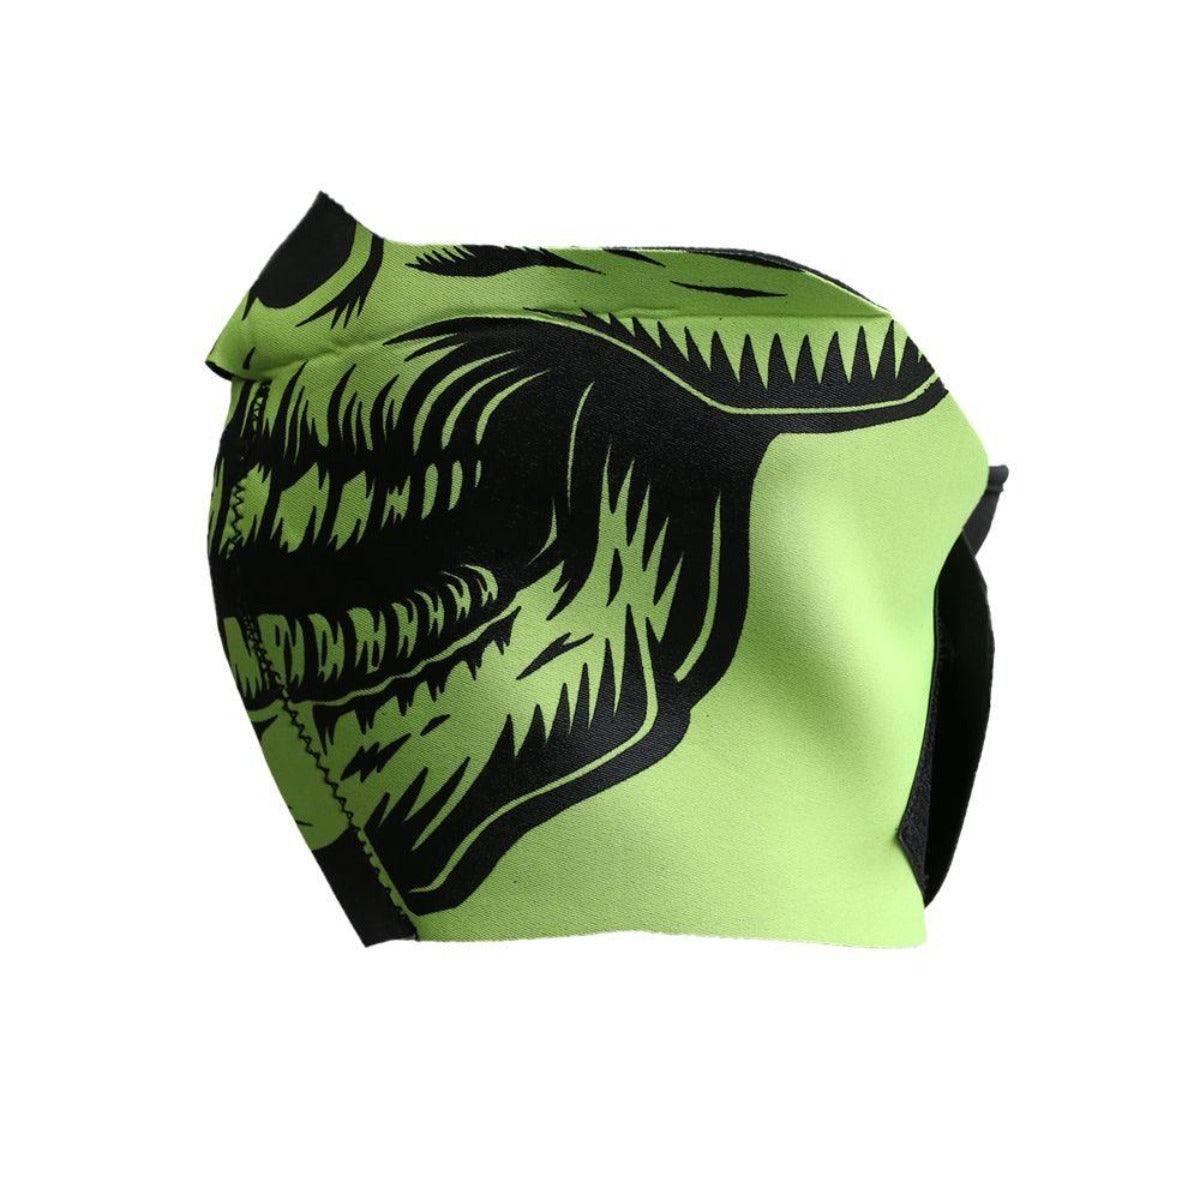 First Manufacturing Neoprene Full Face Riding Mask - American Legend Rider